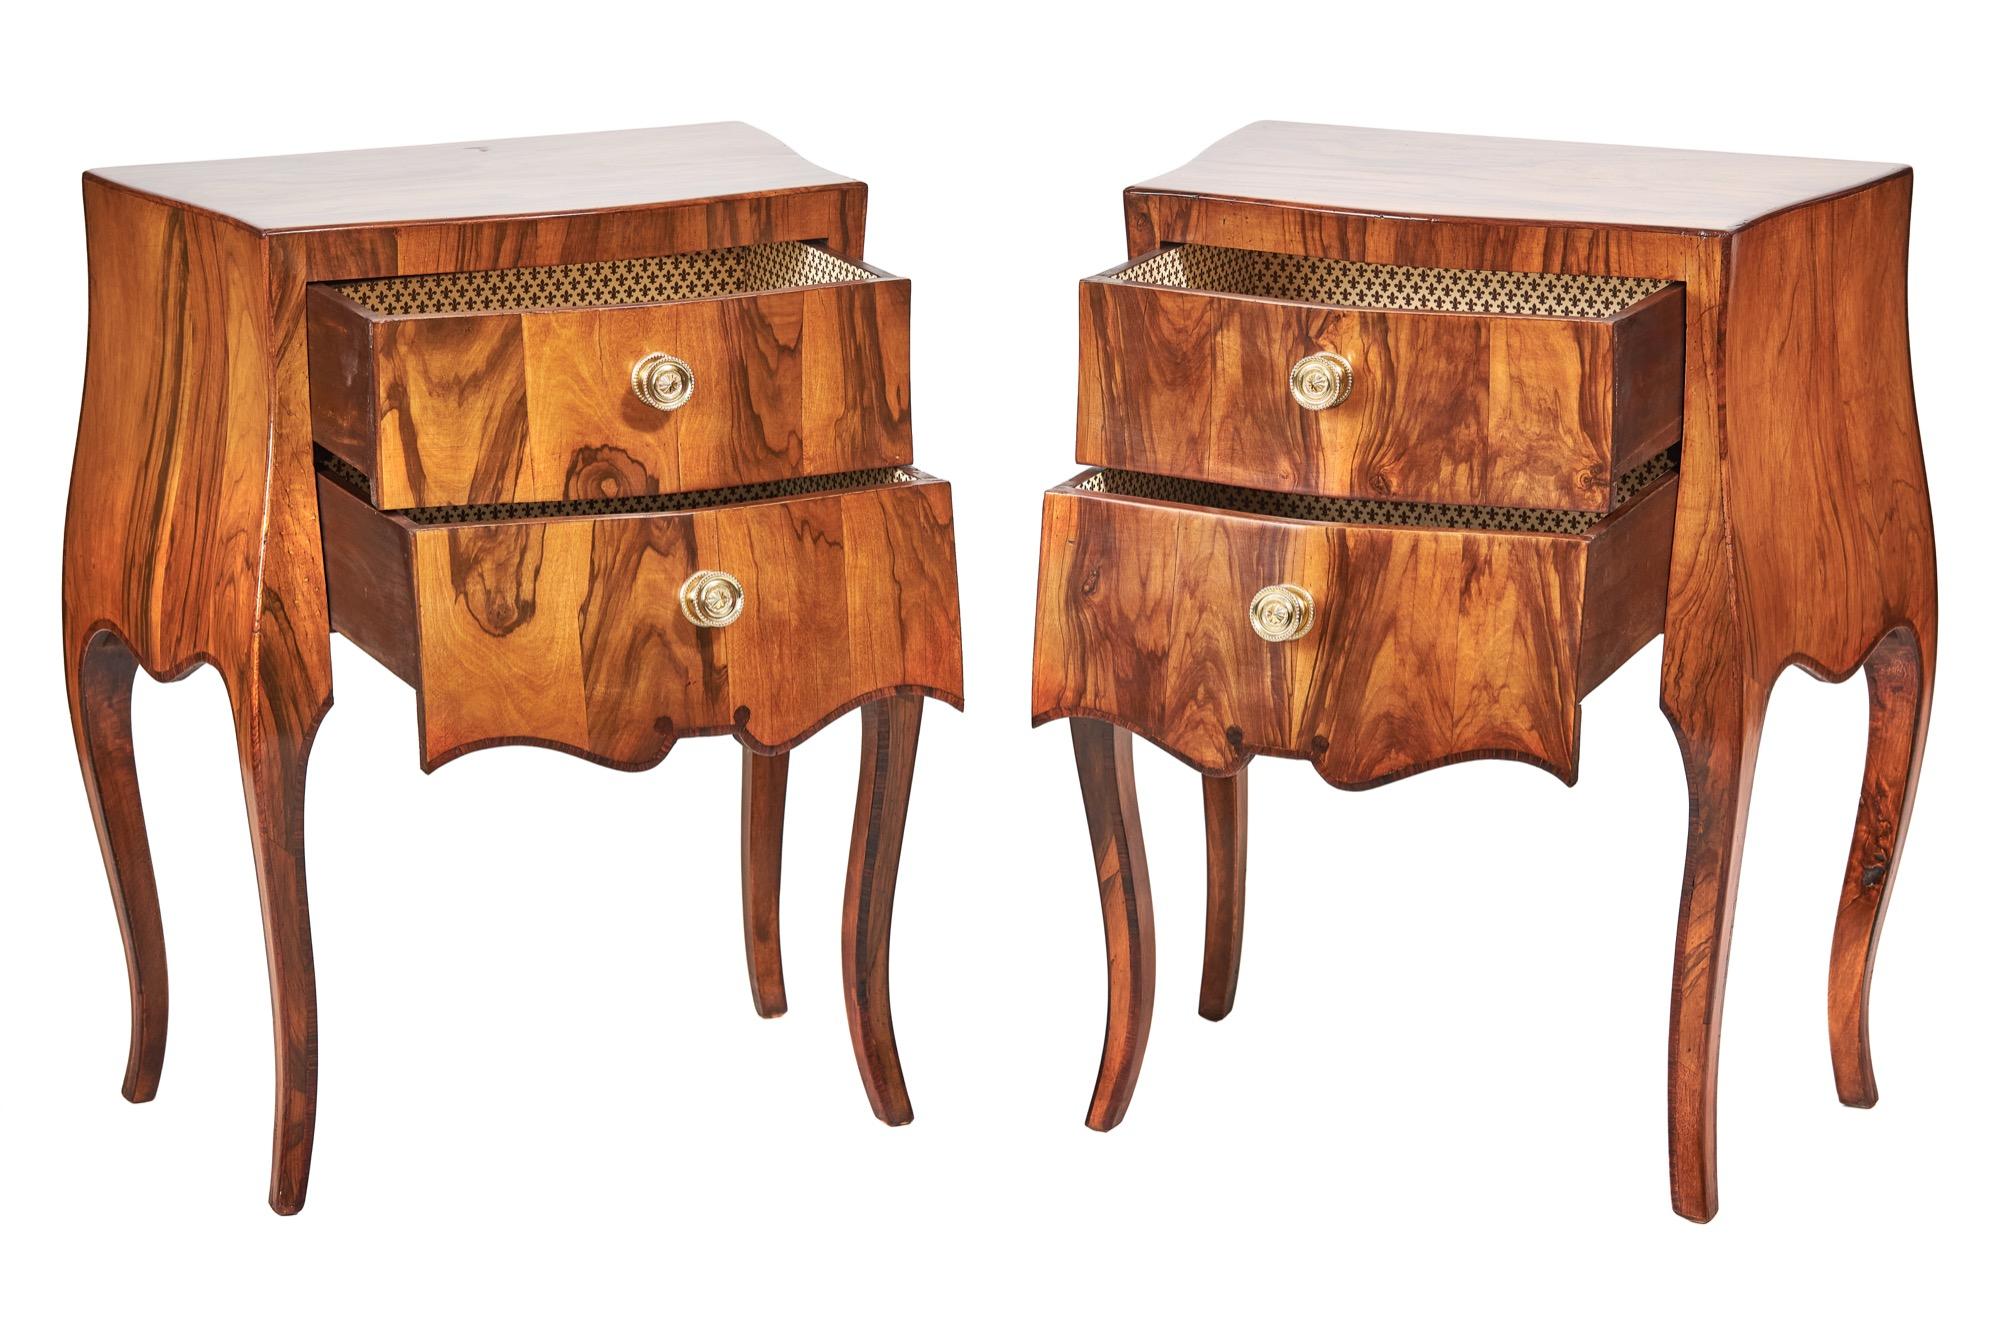 Fine pair French walnut bombe shape 2 drawer chests, circa 1920s
Figured Walnut,
Each with Two drawers, cast brass knobs,
Drawers lined with Fleur-de-lis design paper
French Cabriole shaped legs.
Tulipwood inlay around ouside of legs & bottom